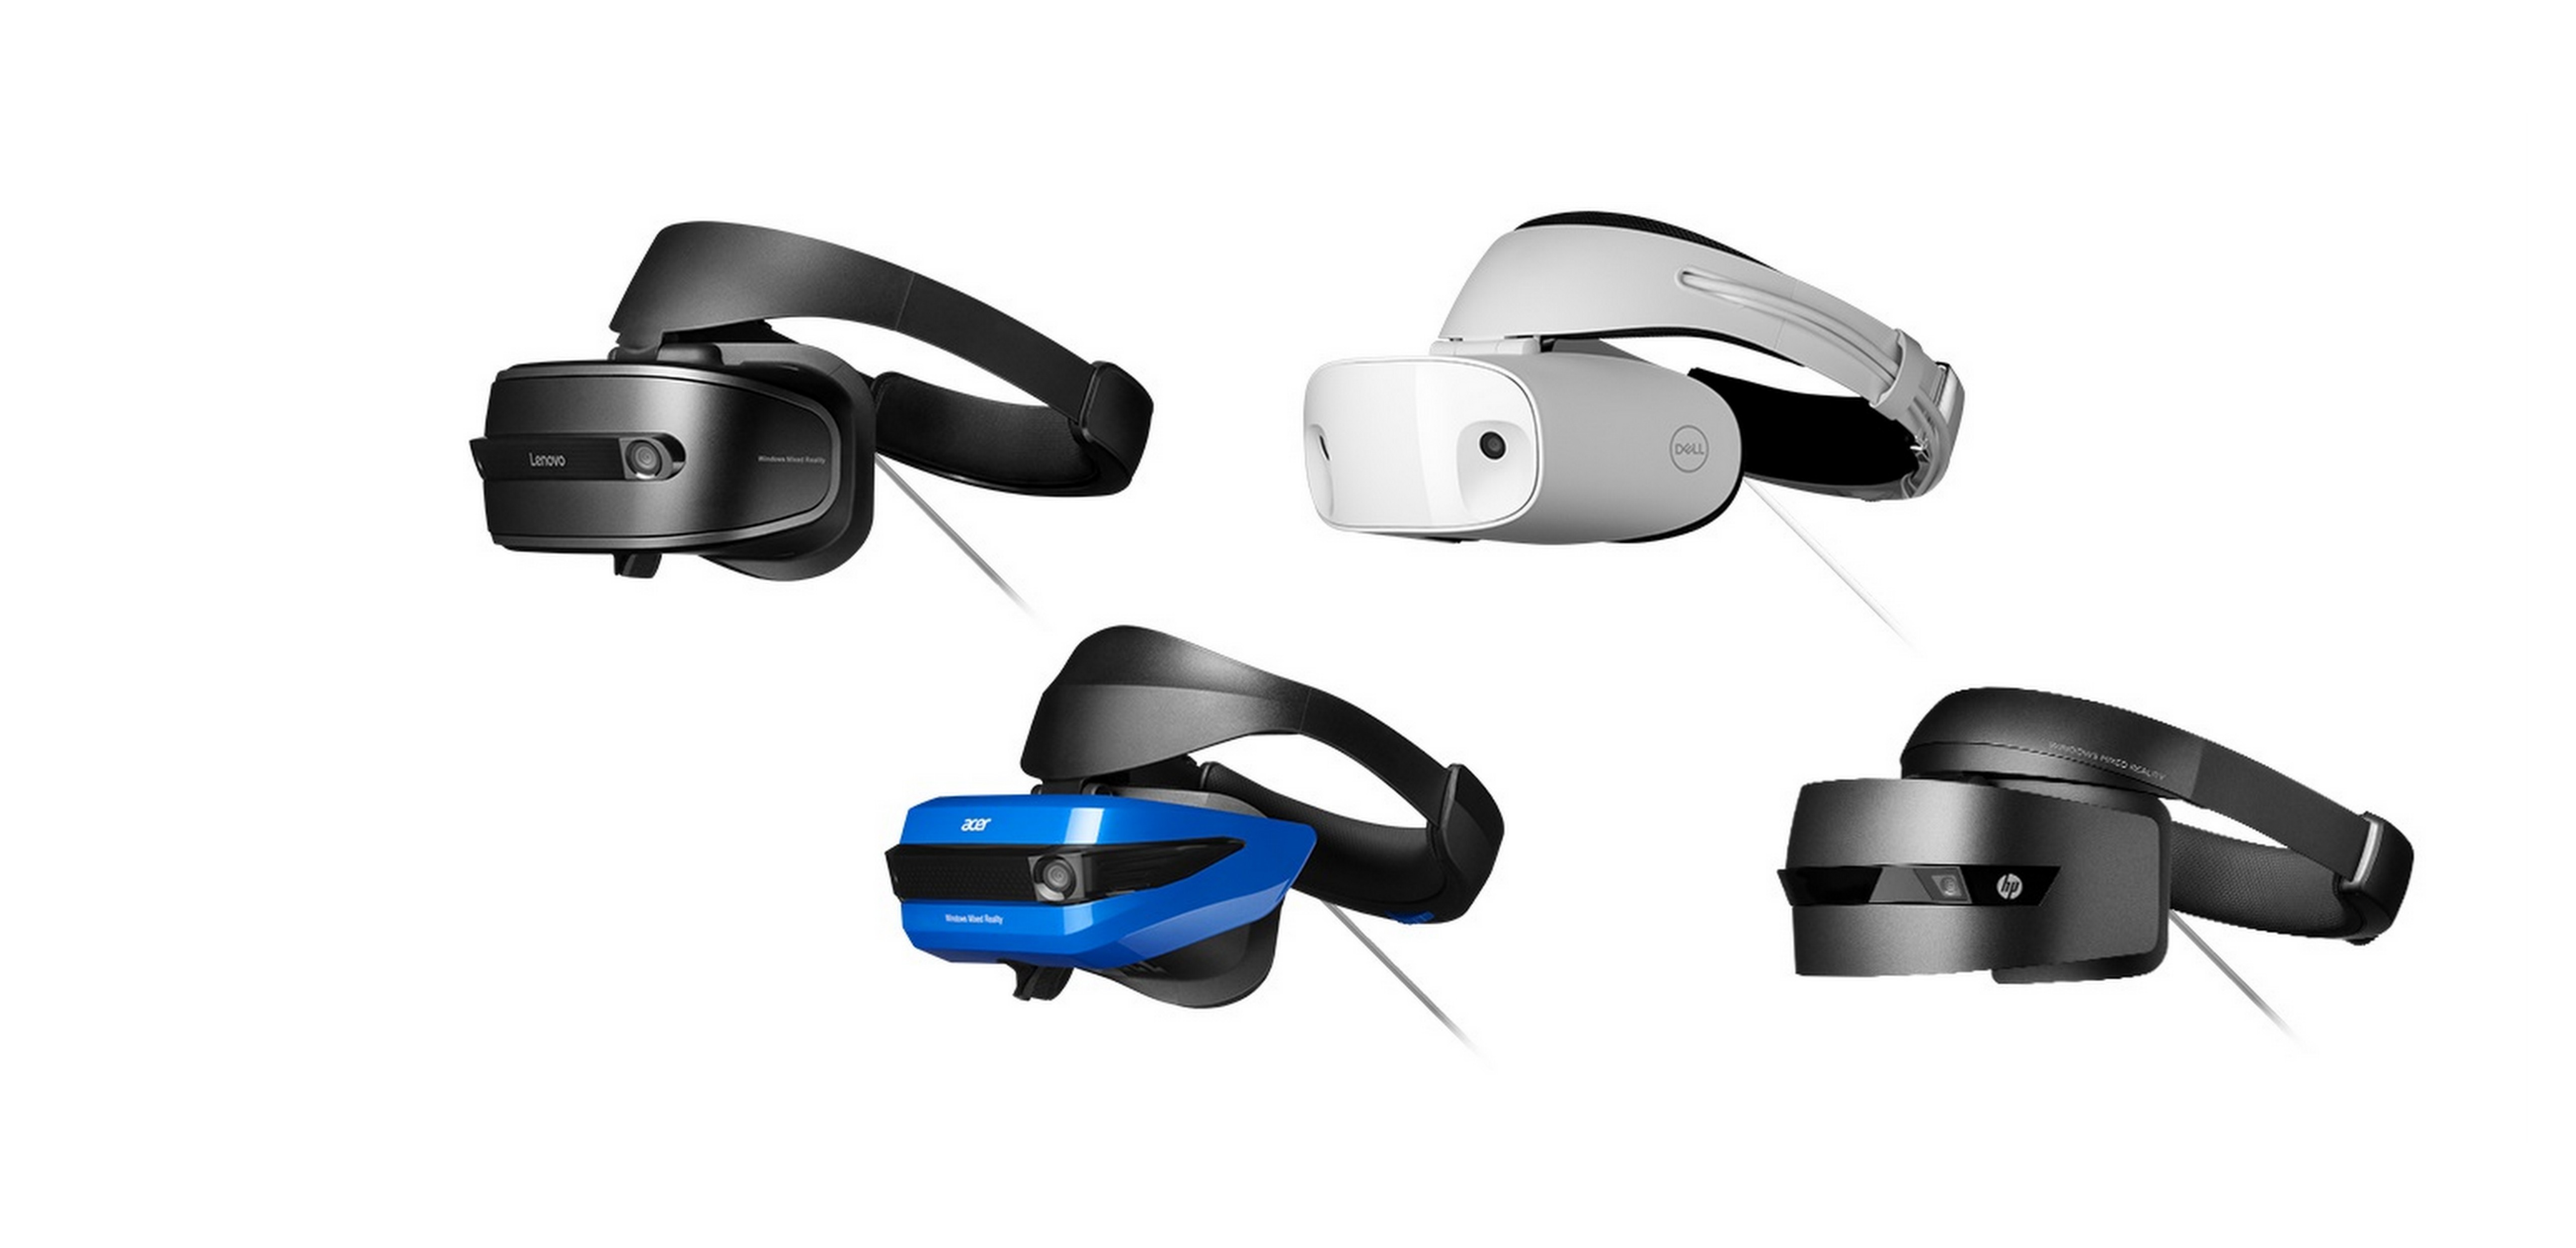 Windows Mixed Reality headsets from device partners